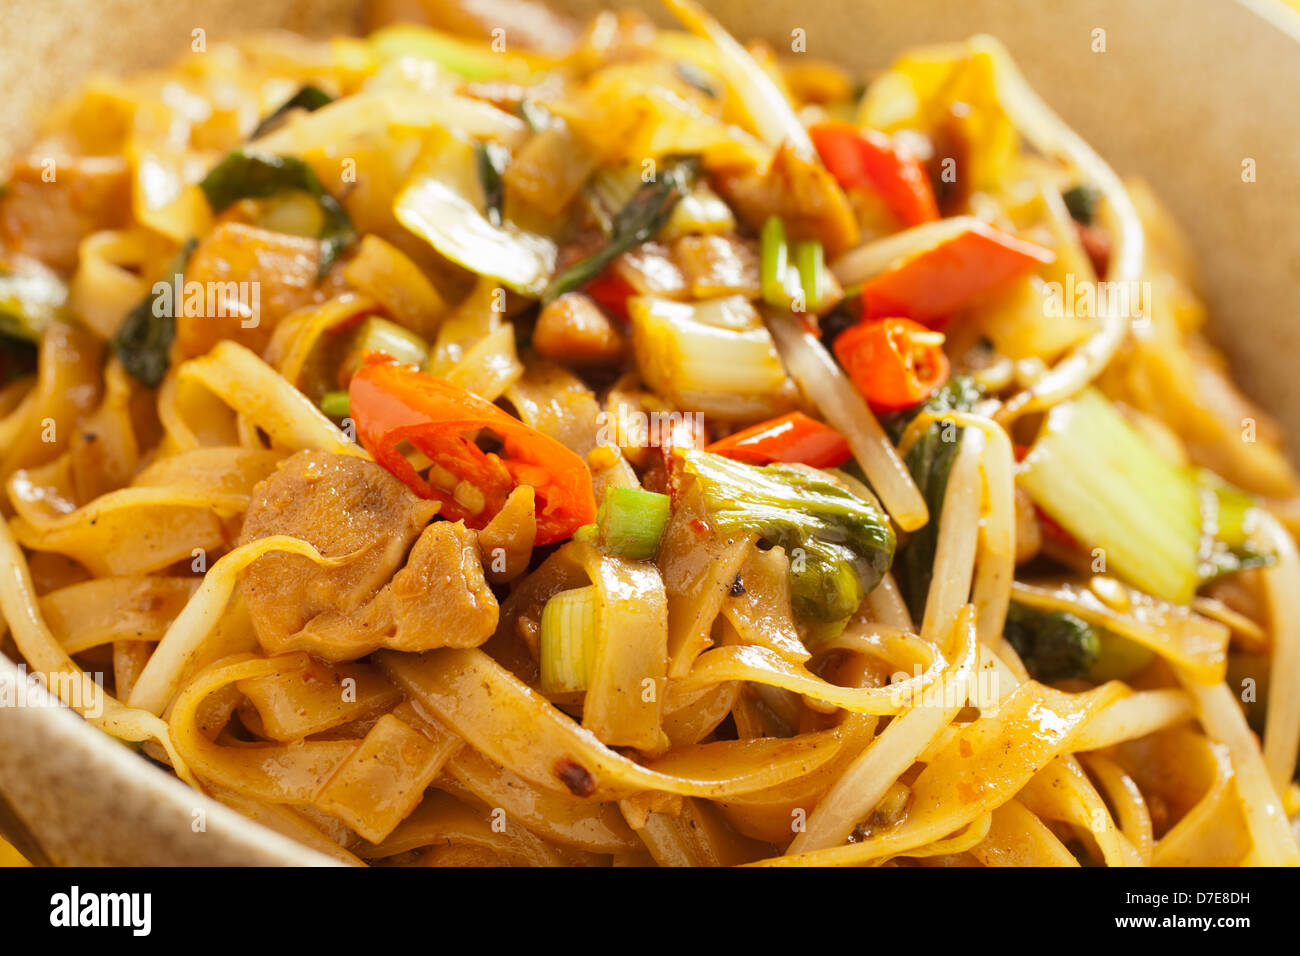 Char Kway Teow, Malaysian fried noodles Stock Photo